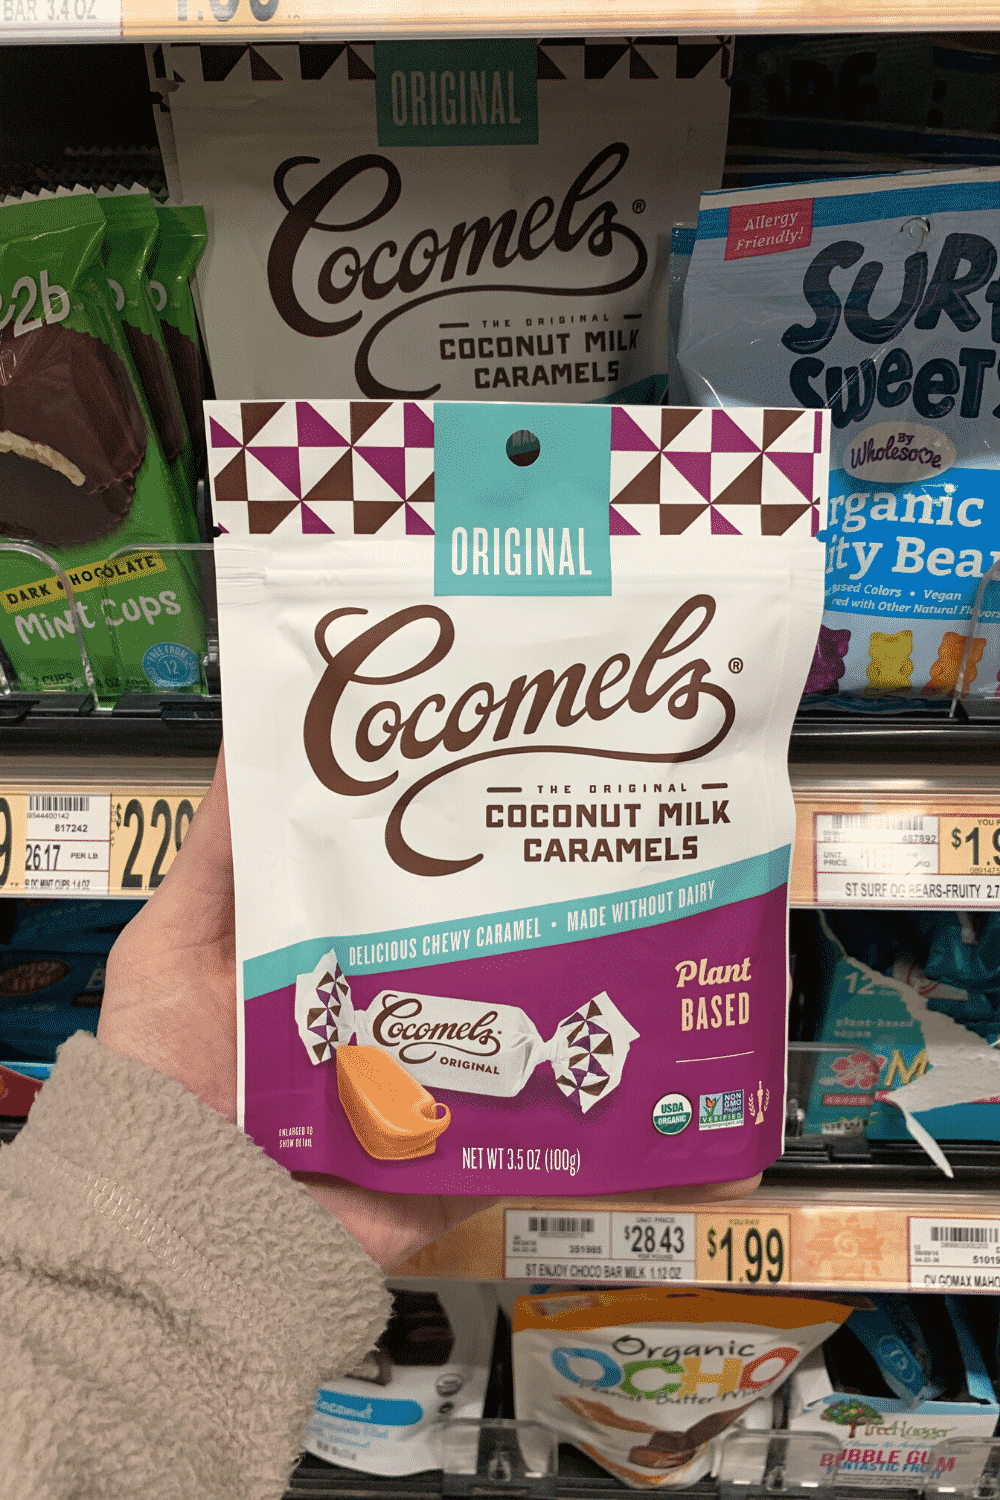 A hand holding a package of cocomels coconut milk caramels